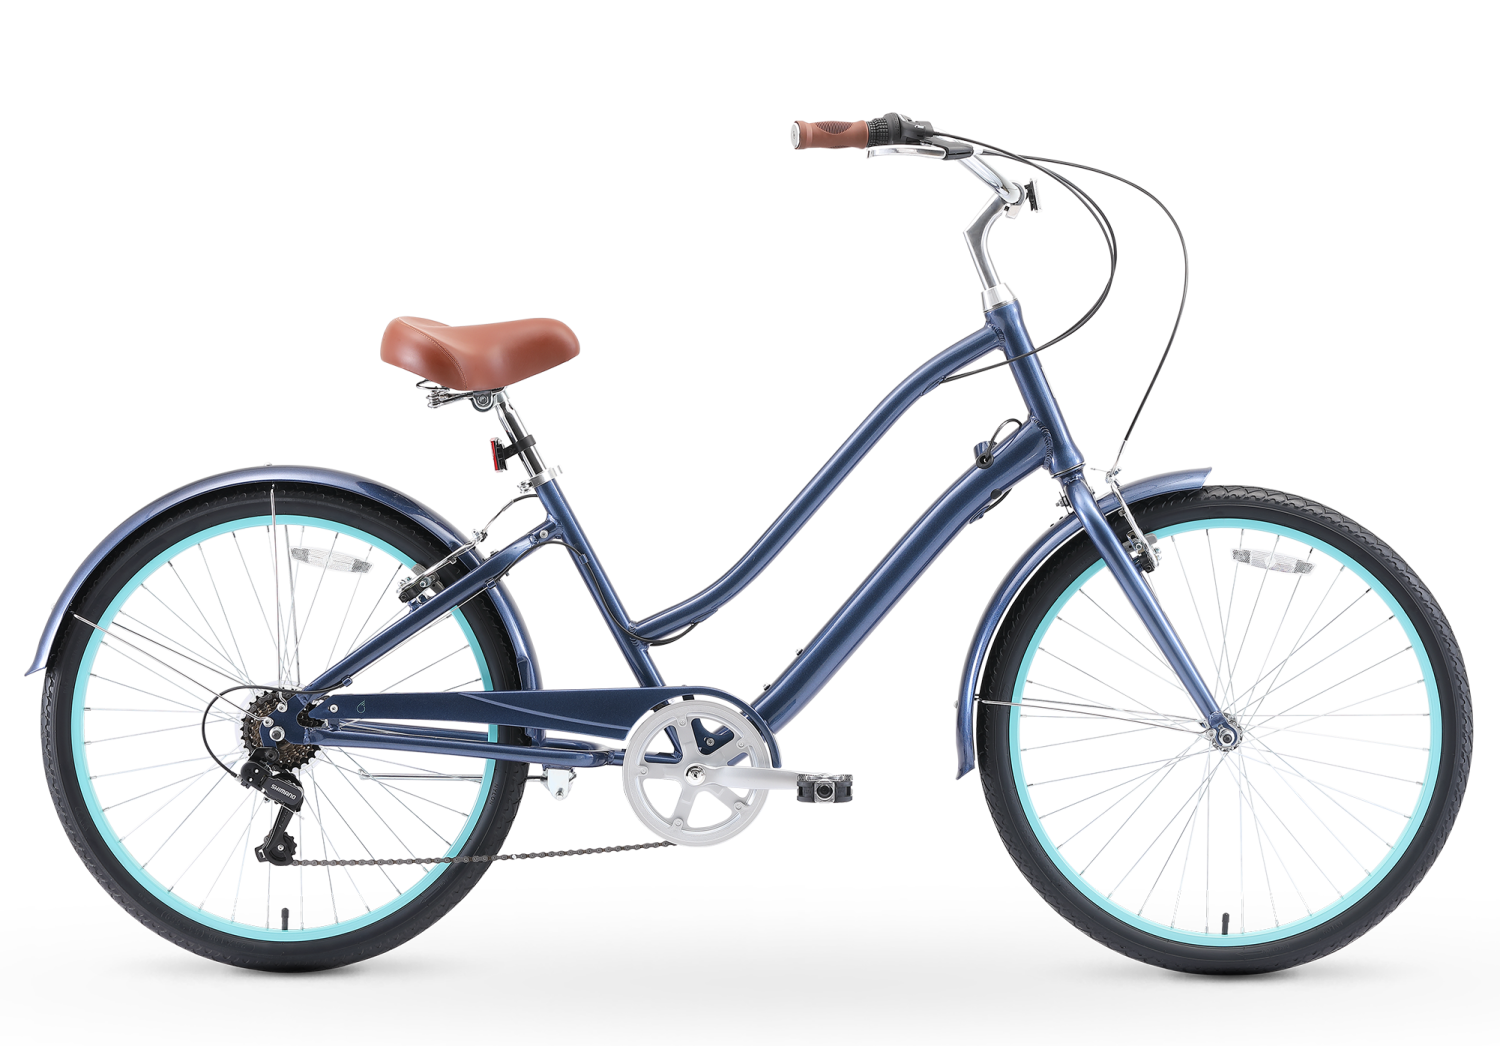 Women's Bikes - Ladies Bicycles For Sale - Buy Bikes For Women Online (Cool Colors & Cheap 